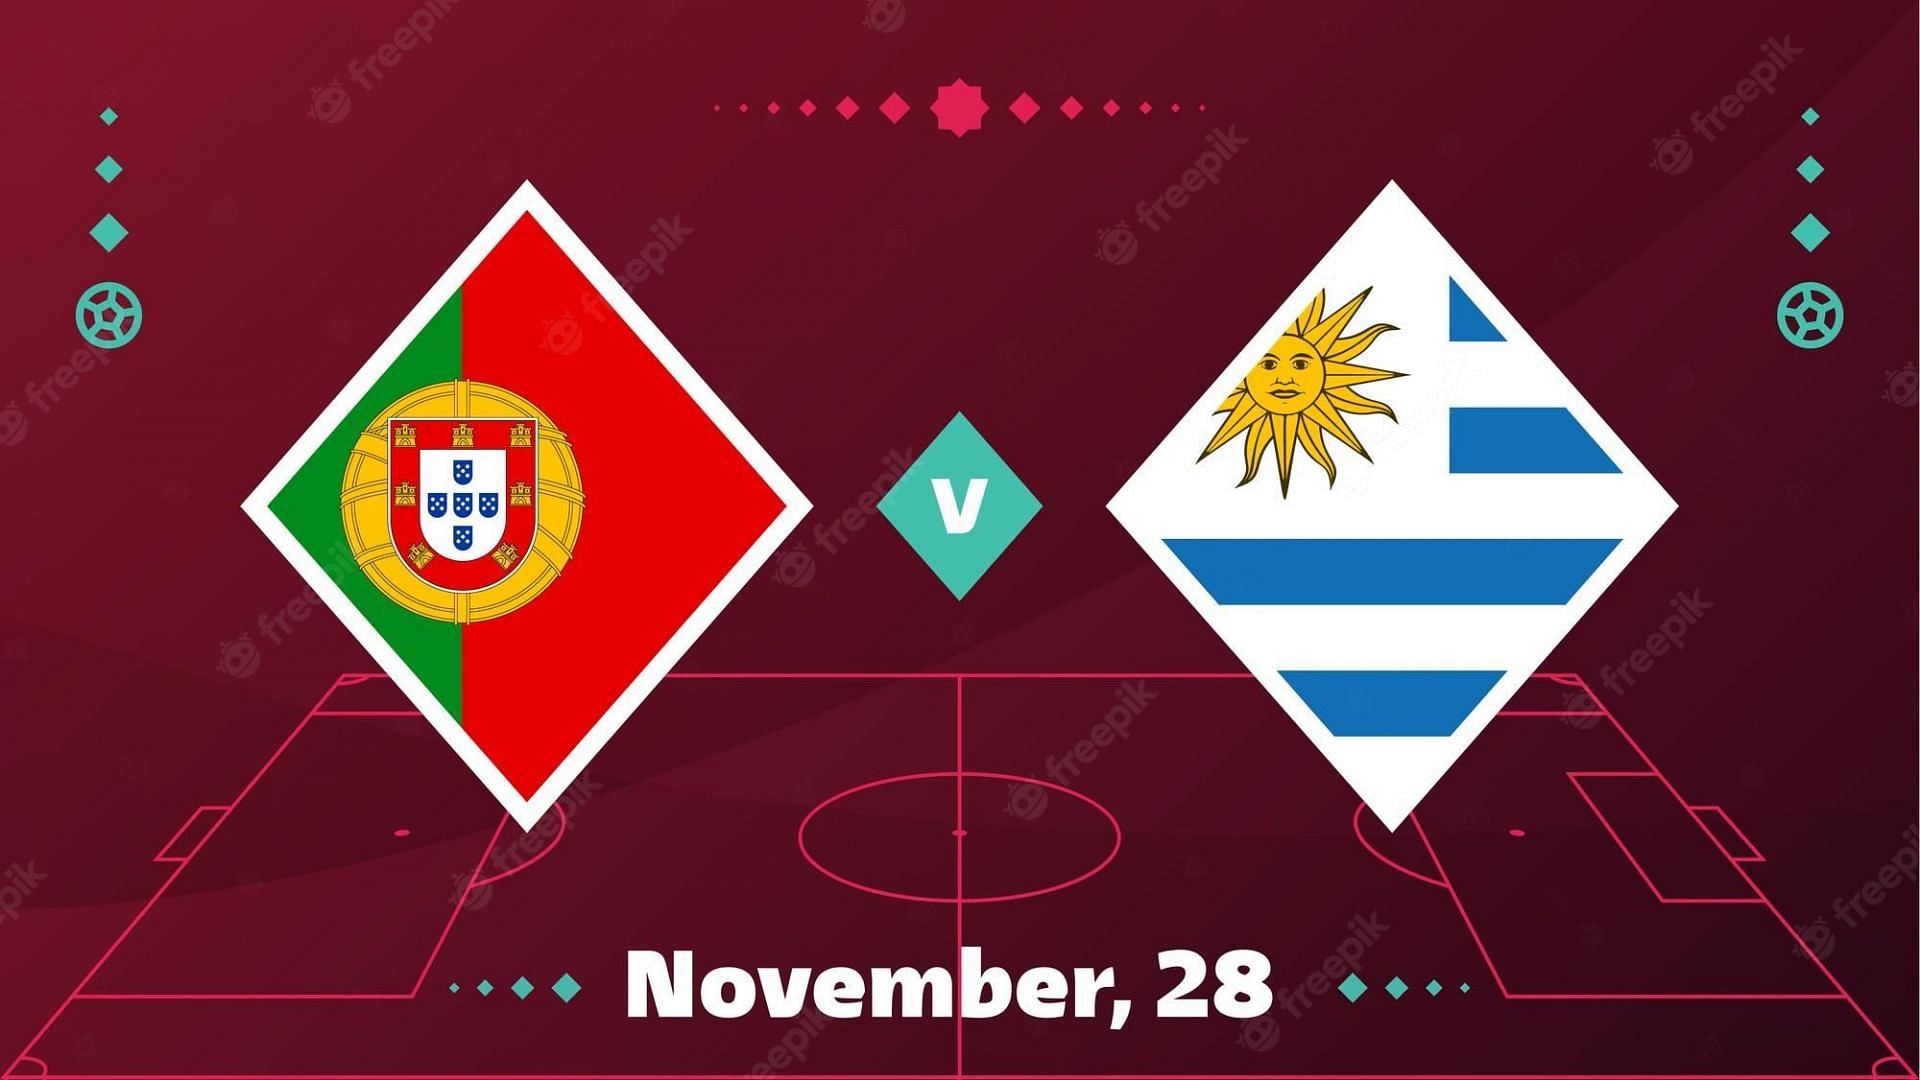 Portugal and Uruguay will face-off on Tuesday, November 28.